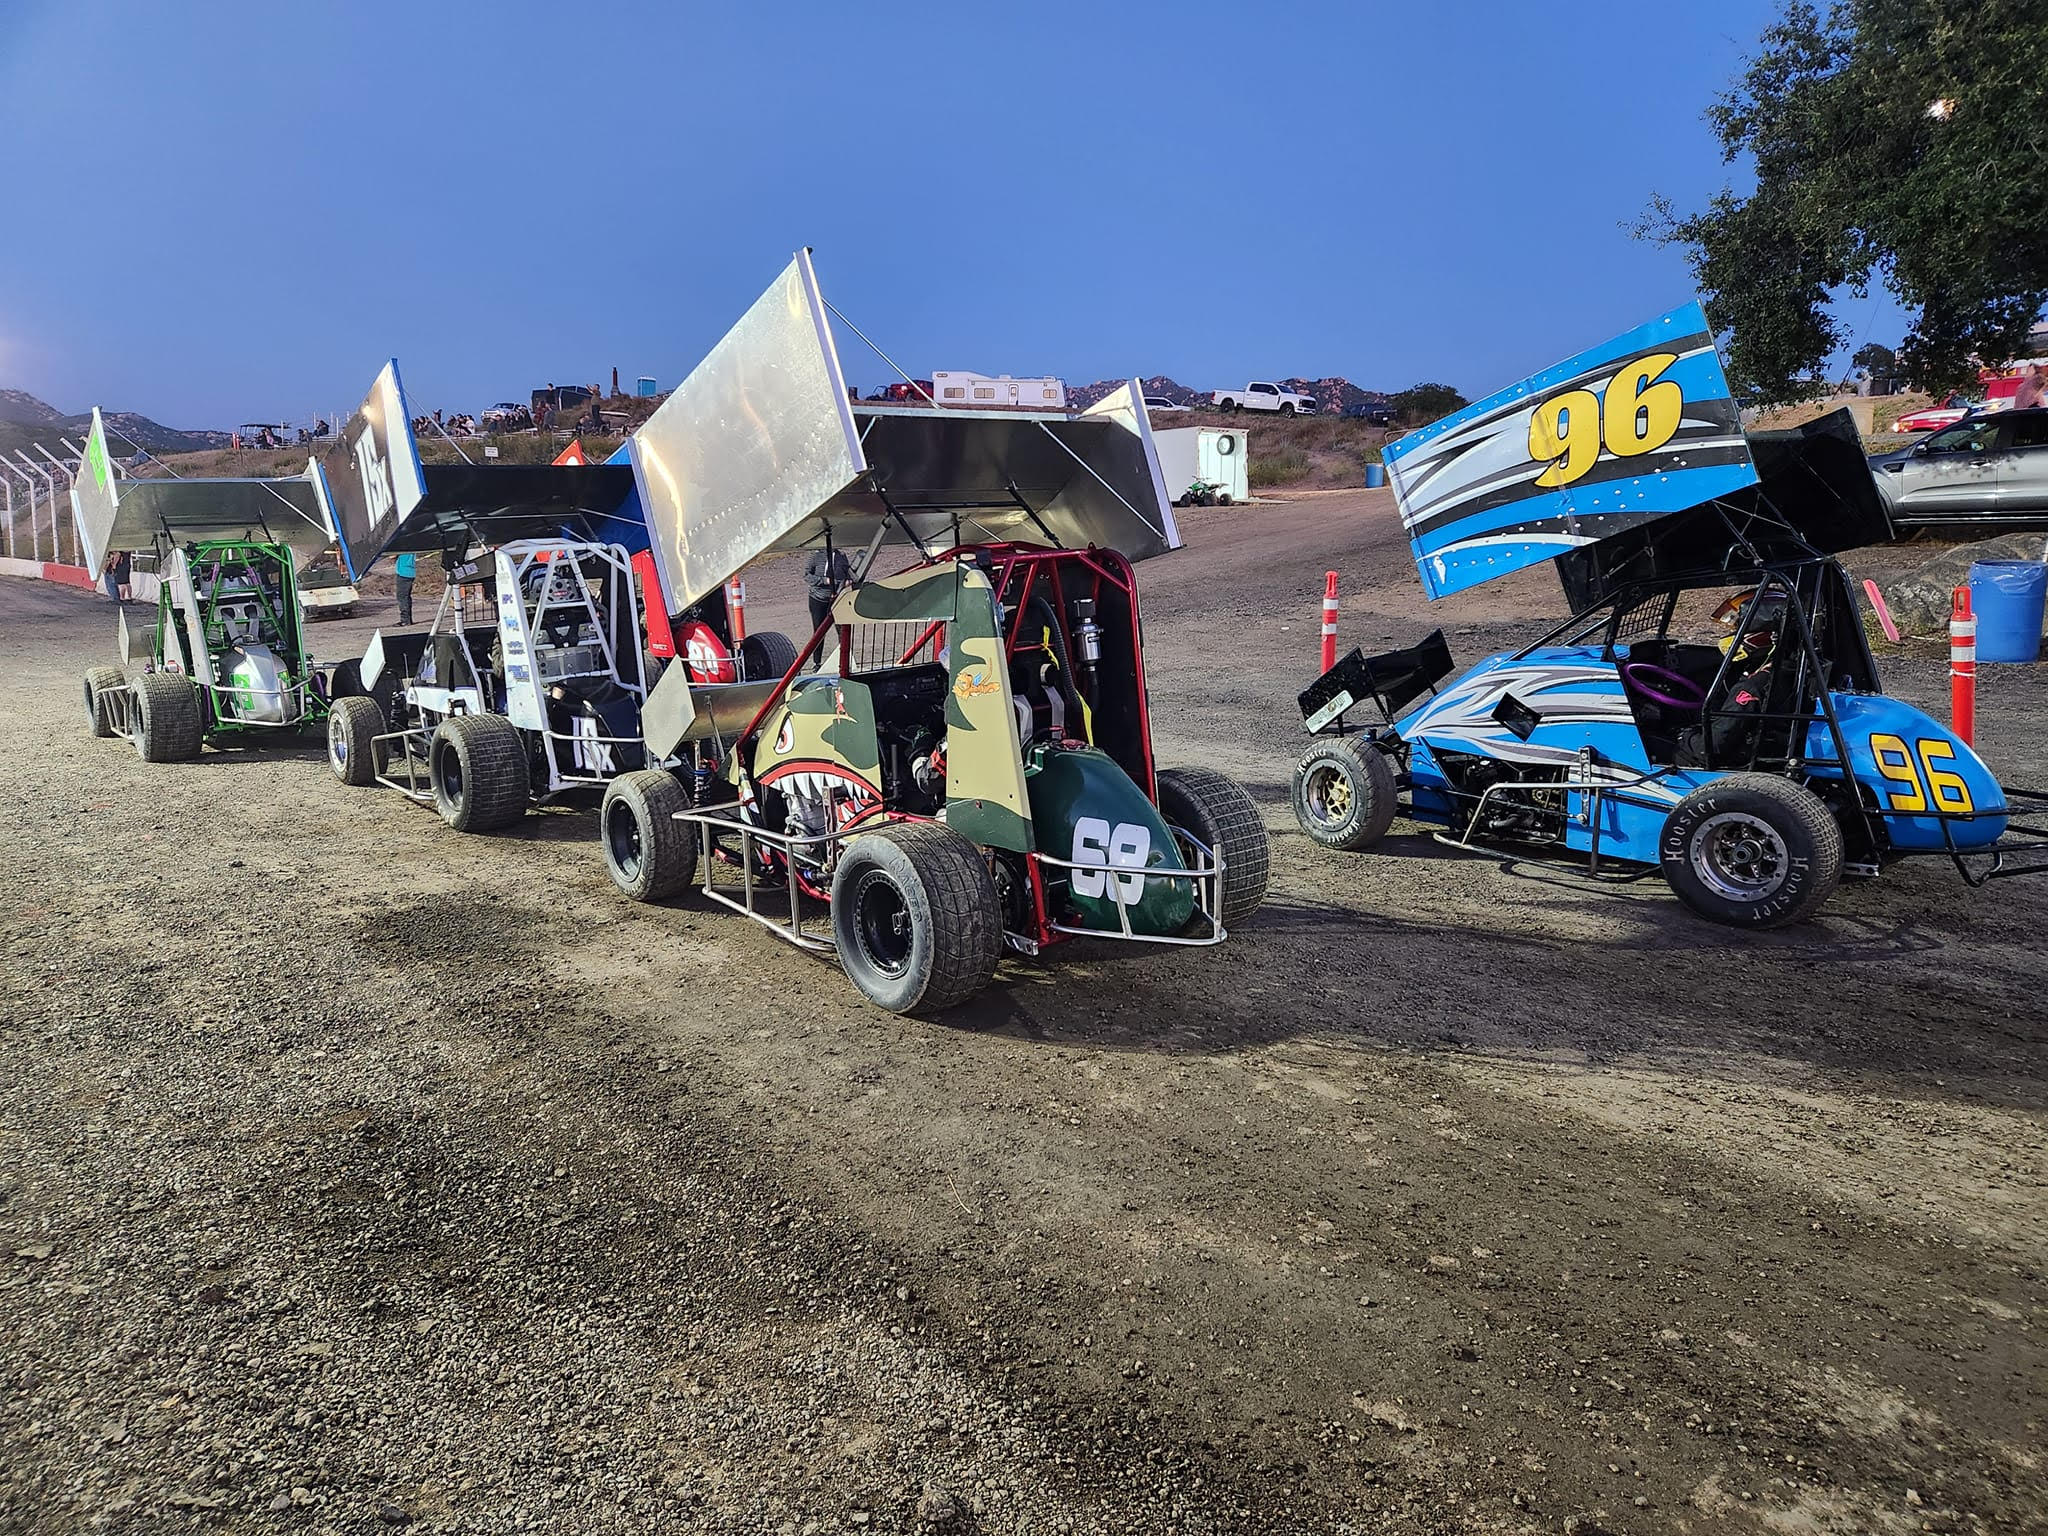 SUMMER VACATION ENDS THIS SATURDAY FOR THE SOCAL LIGHTNING SPRINT CARS